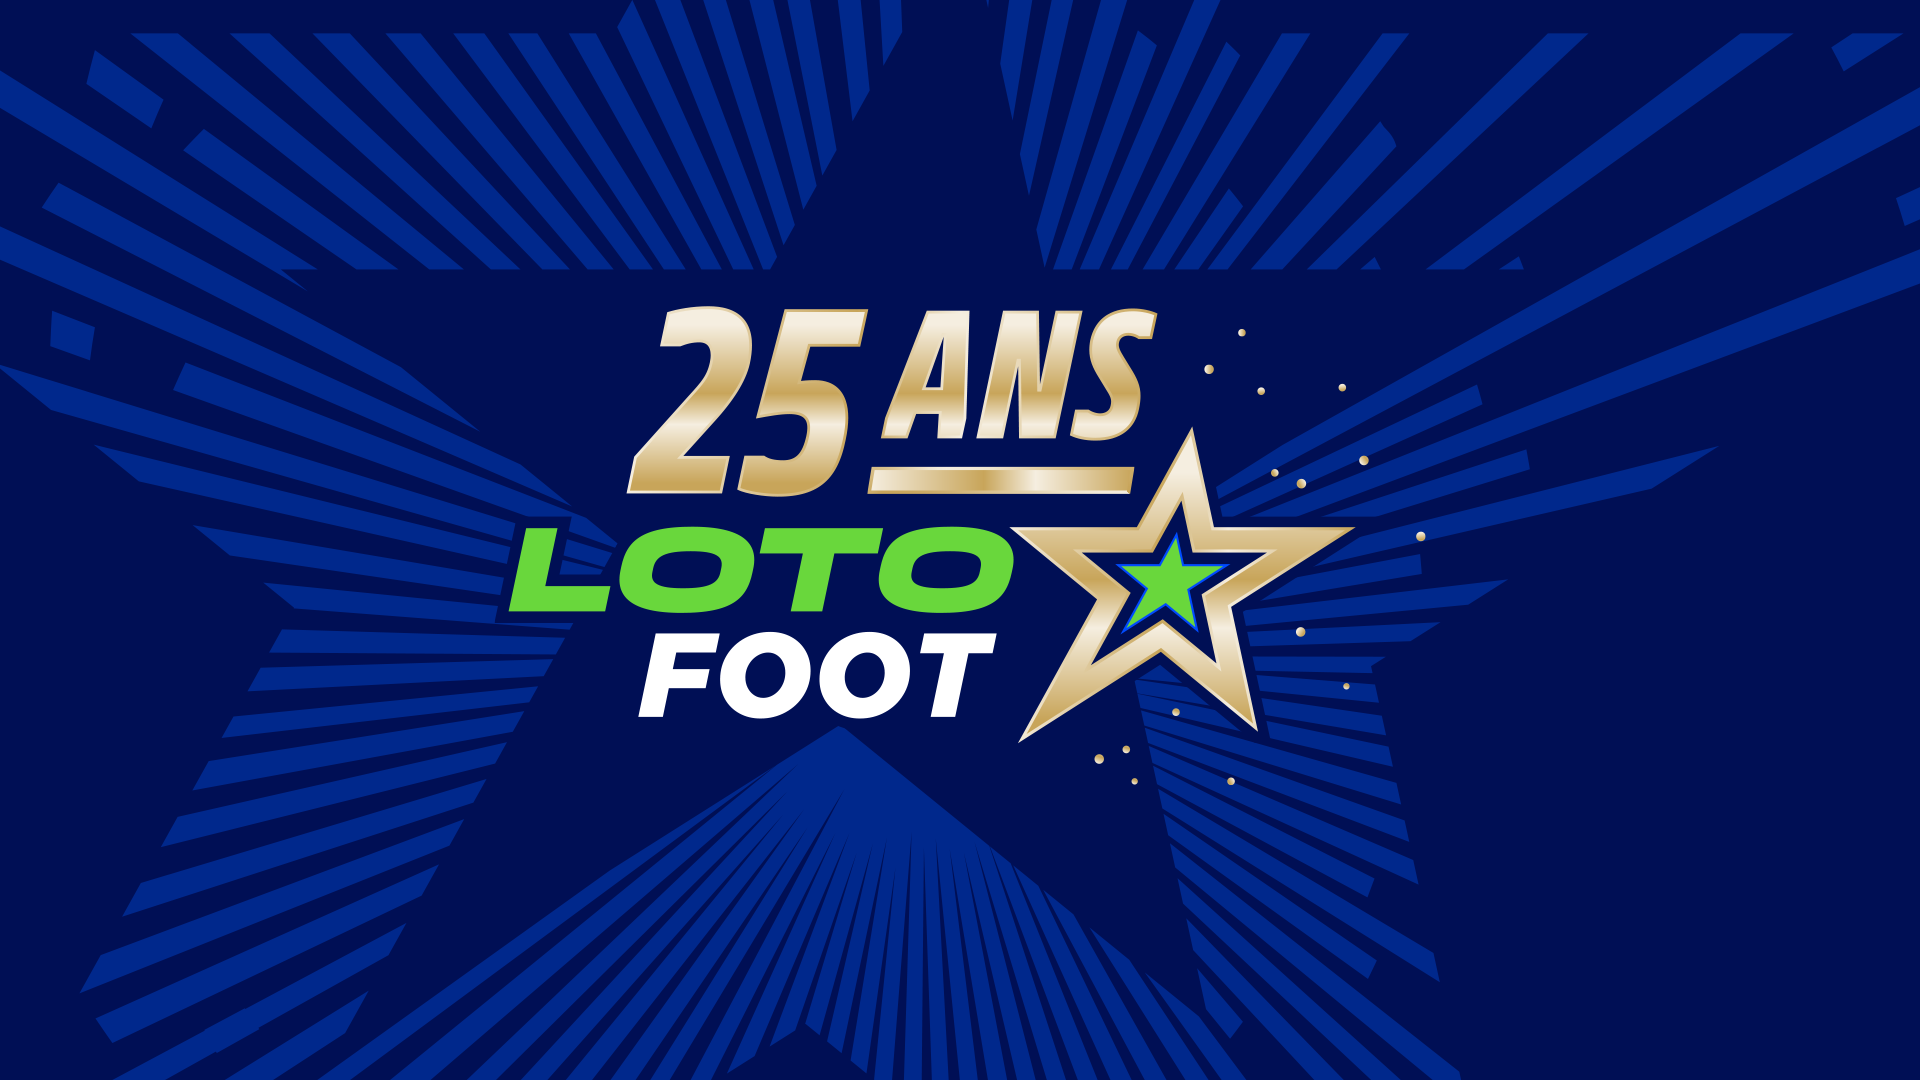 Loto foot 25 ans